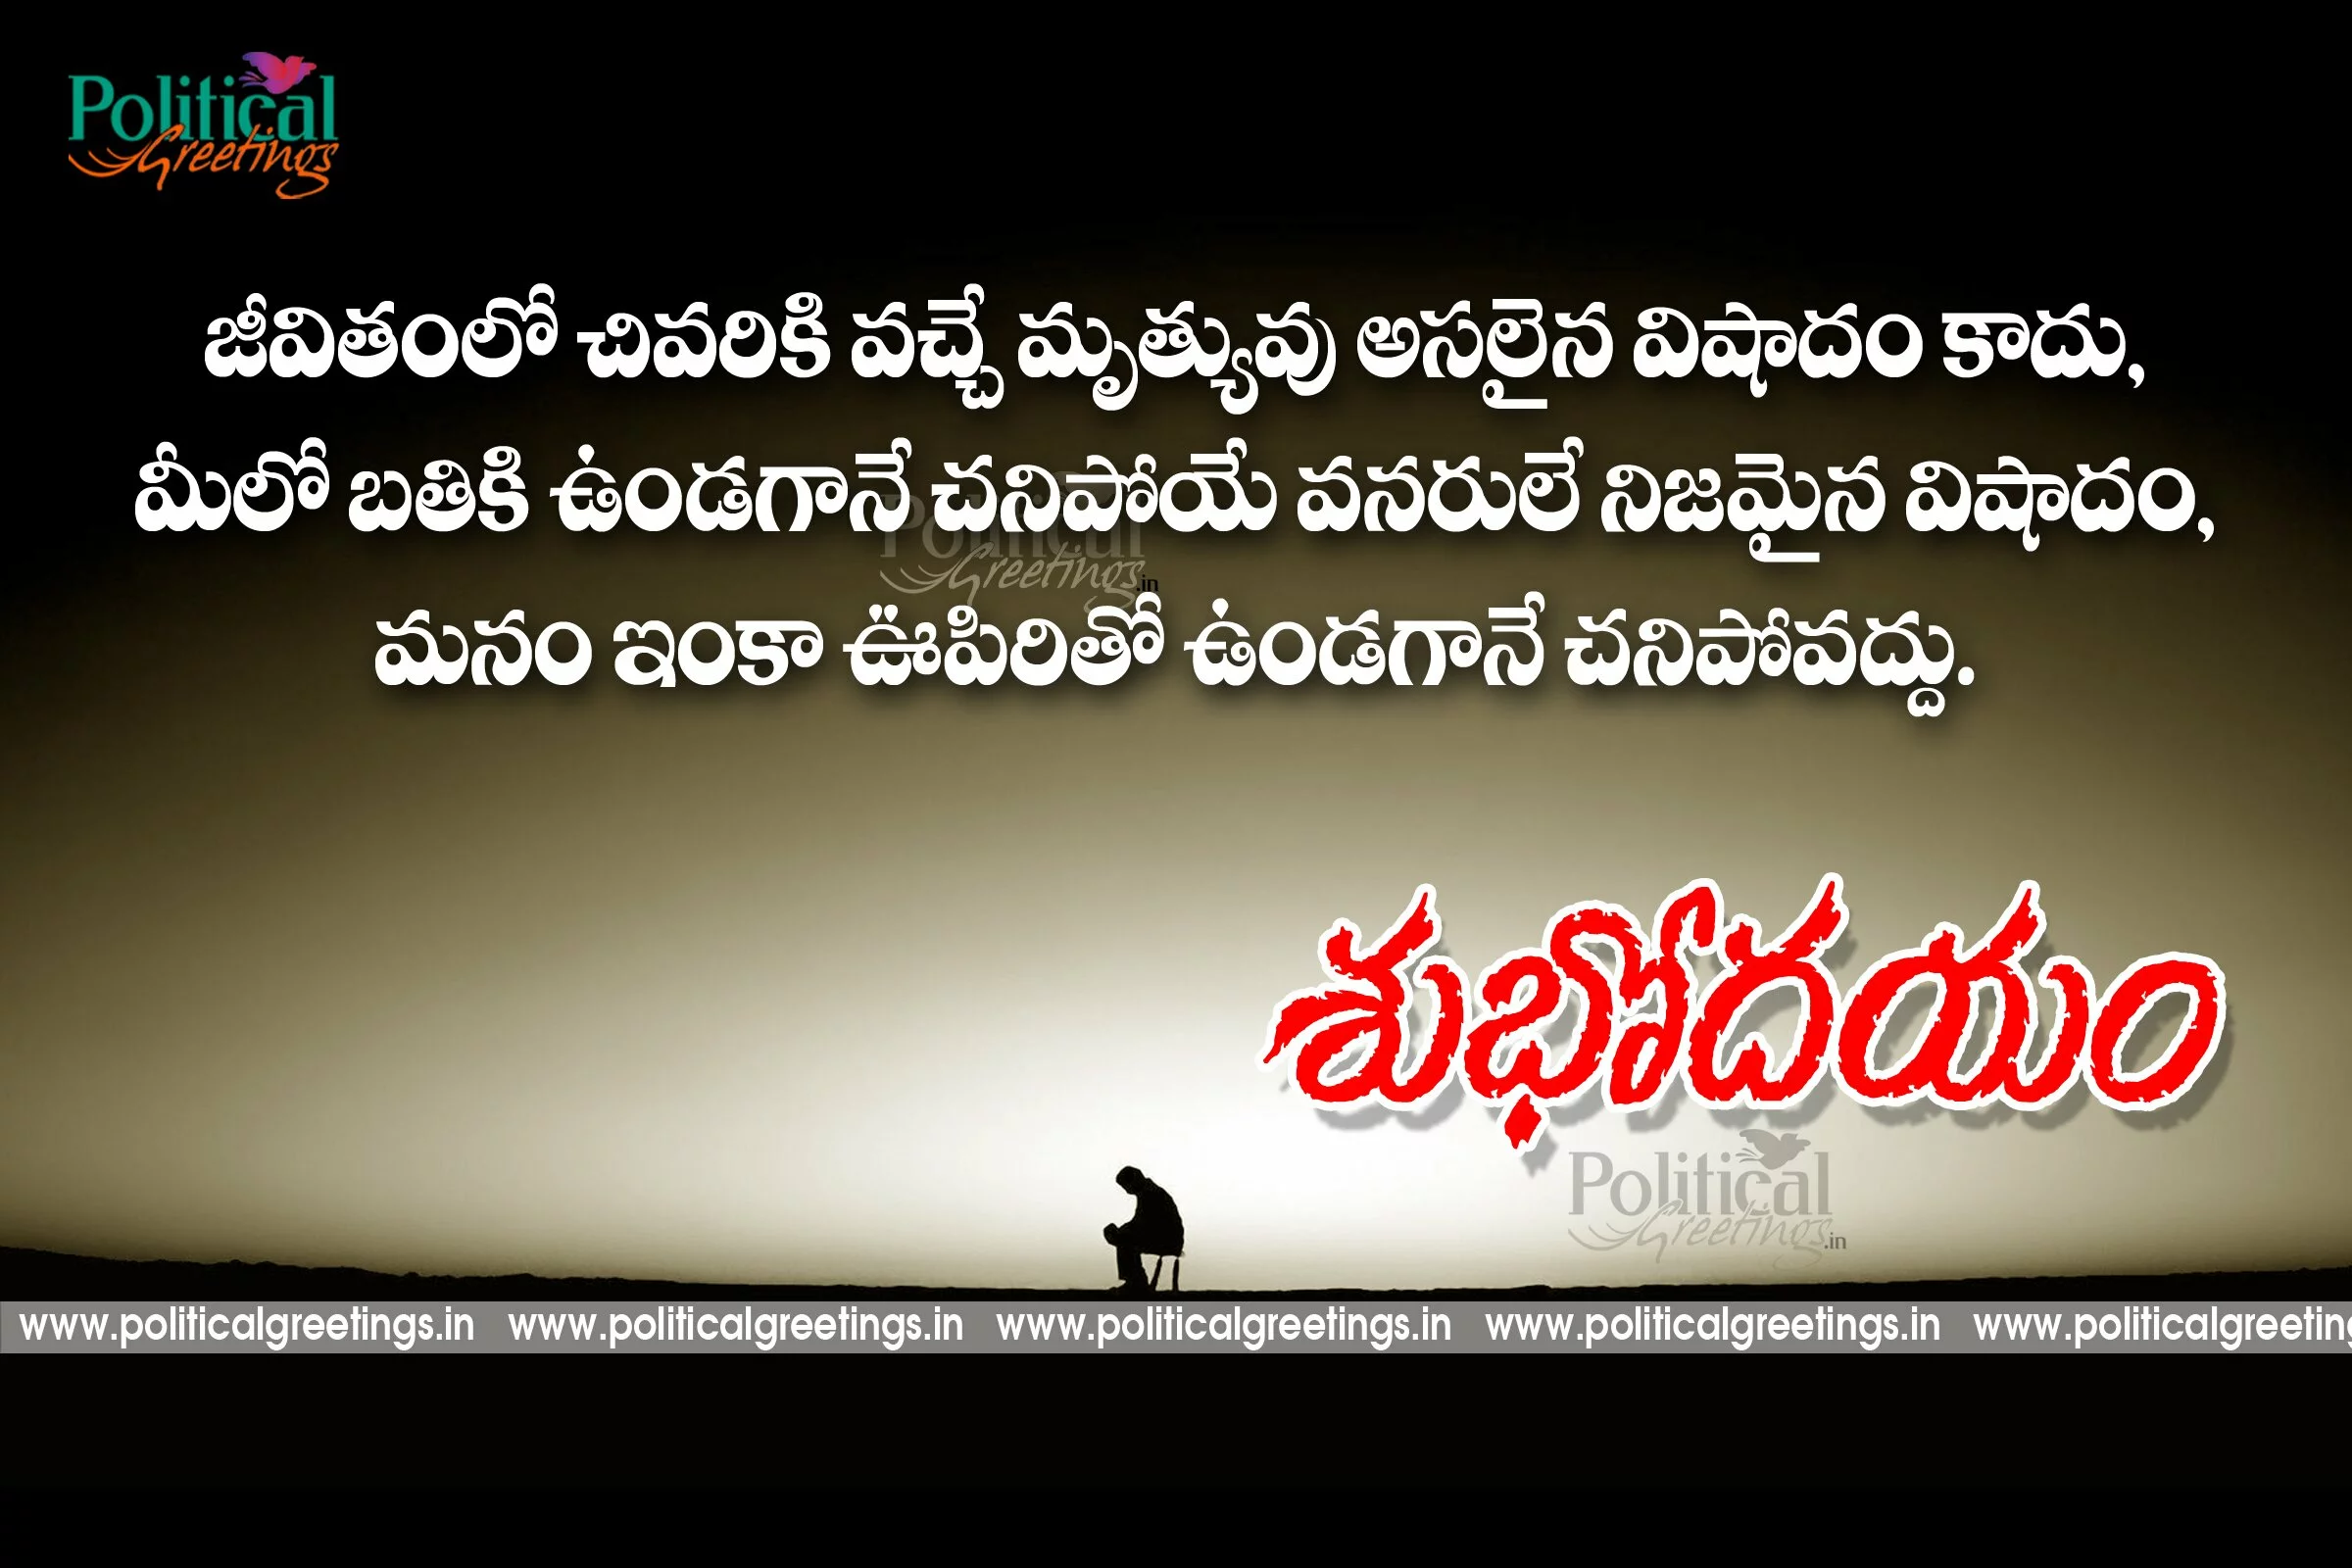 best-good-morning-telugu-quotes-and-greetings-wishes-politicalgreetings-copy